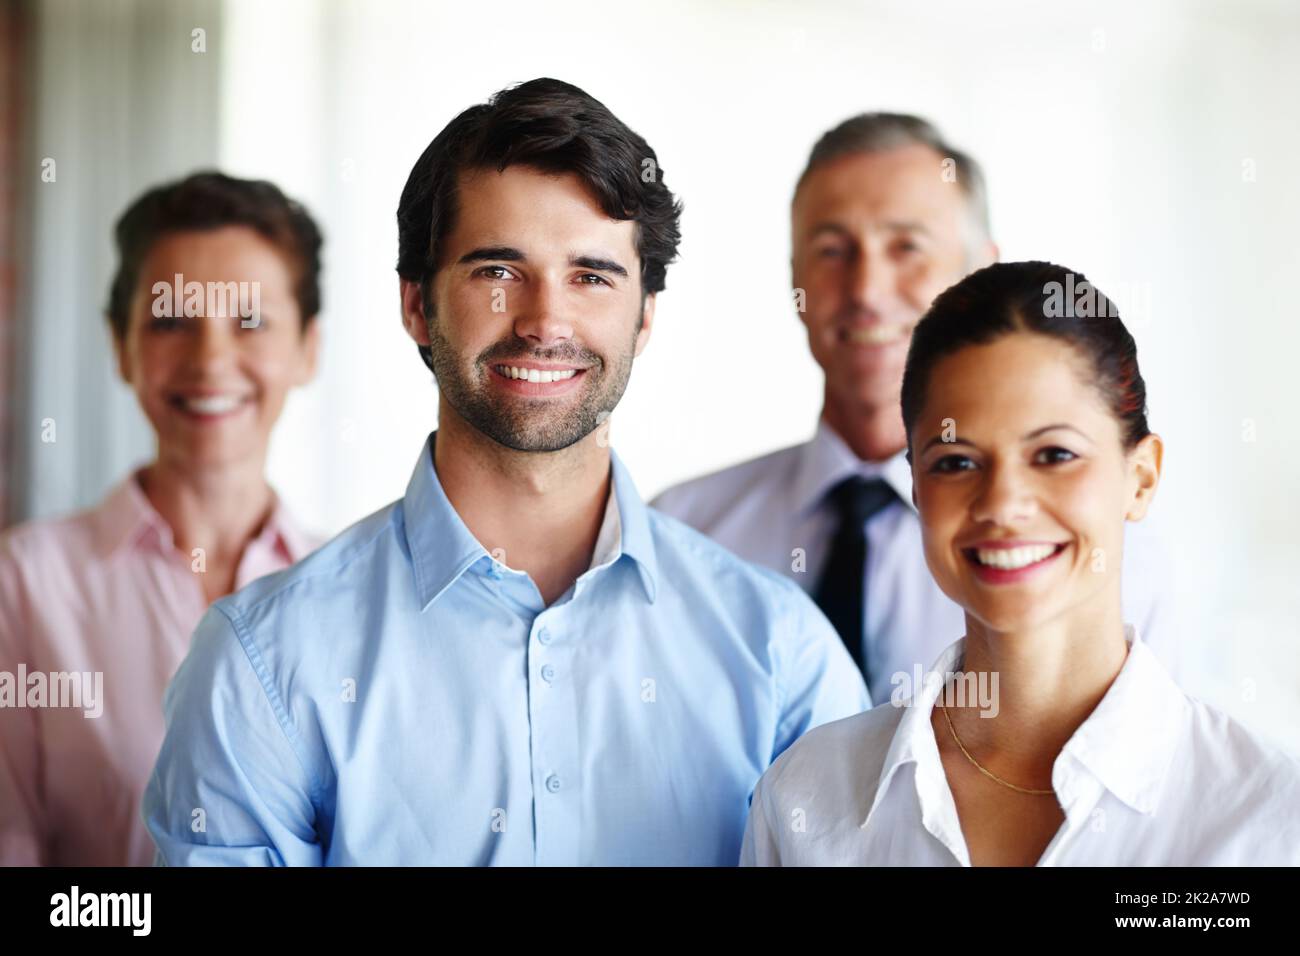 We are a great team. A group of corporate co workers standing alongside each other. Stock Photo